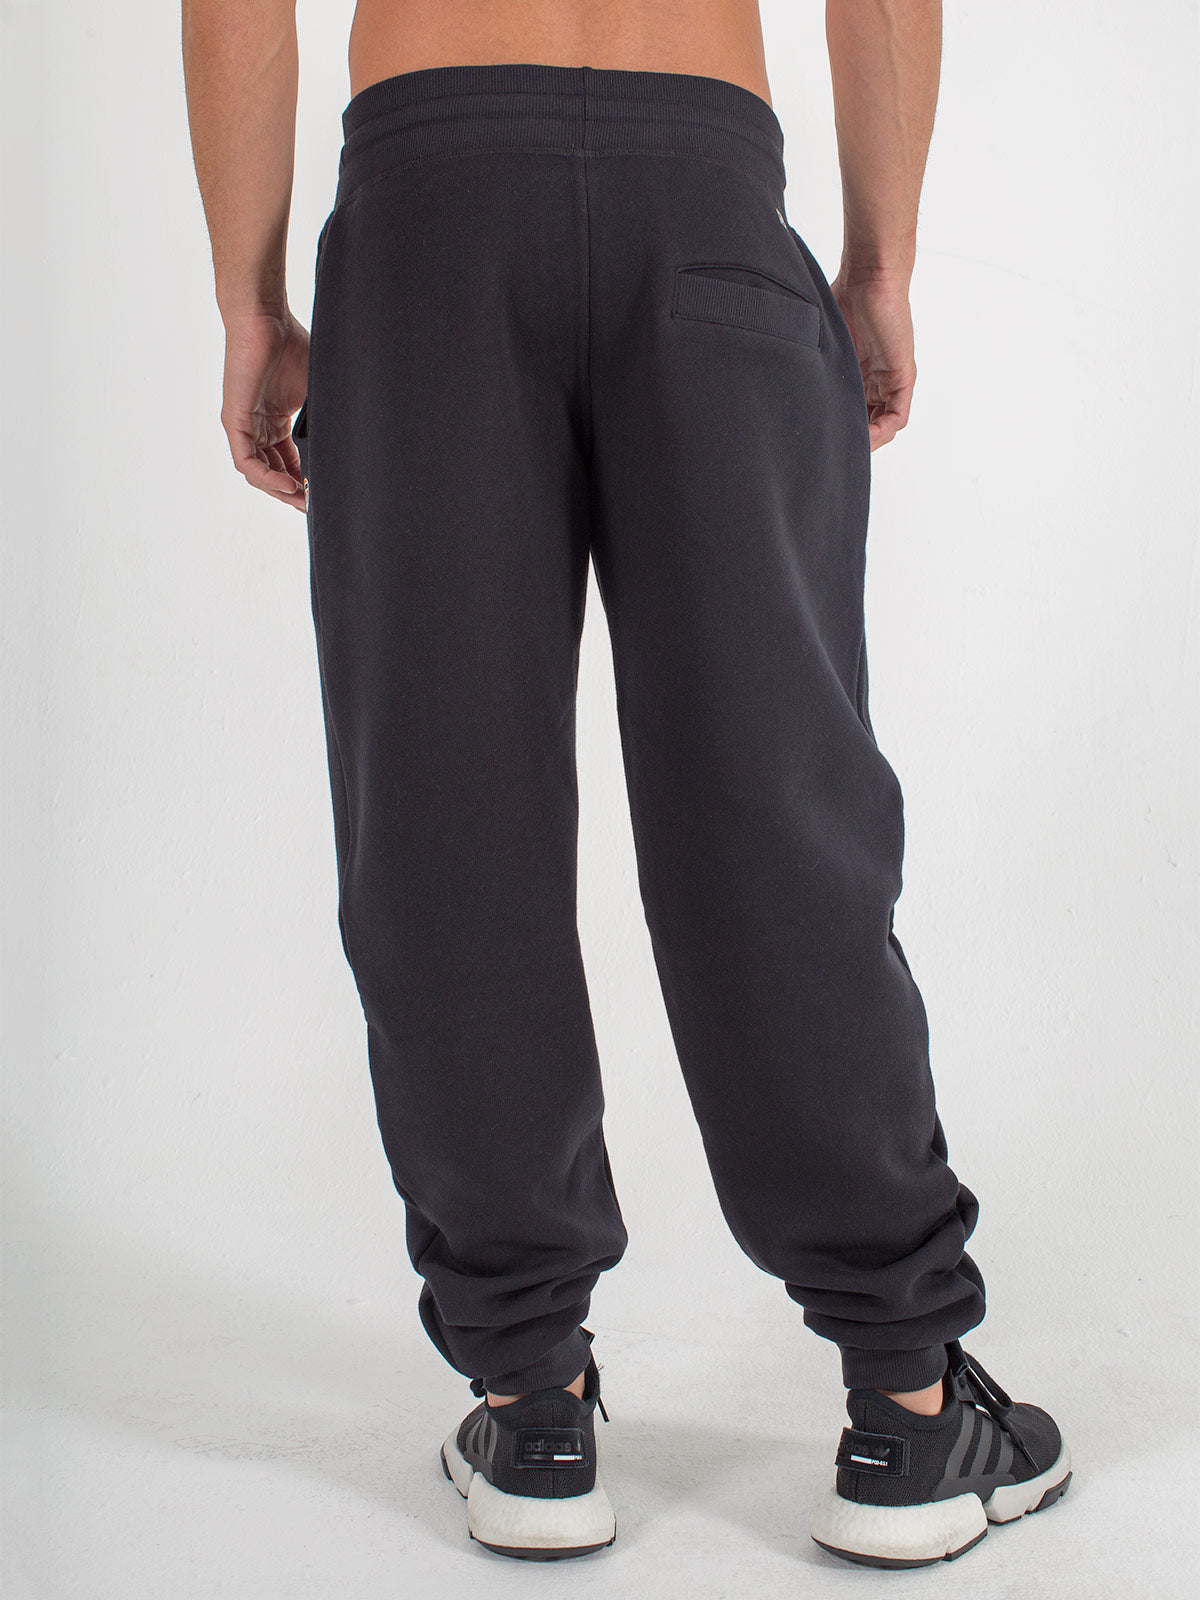 mens sweats joggers sexy brand in black back view